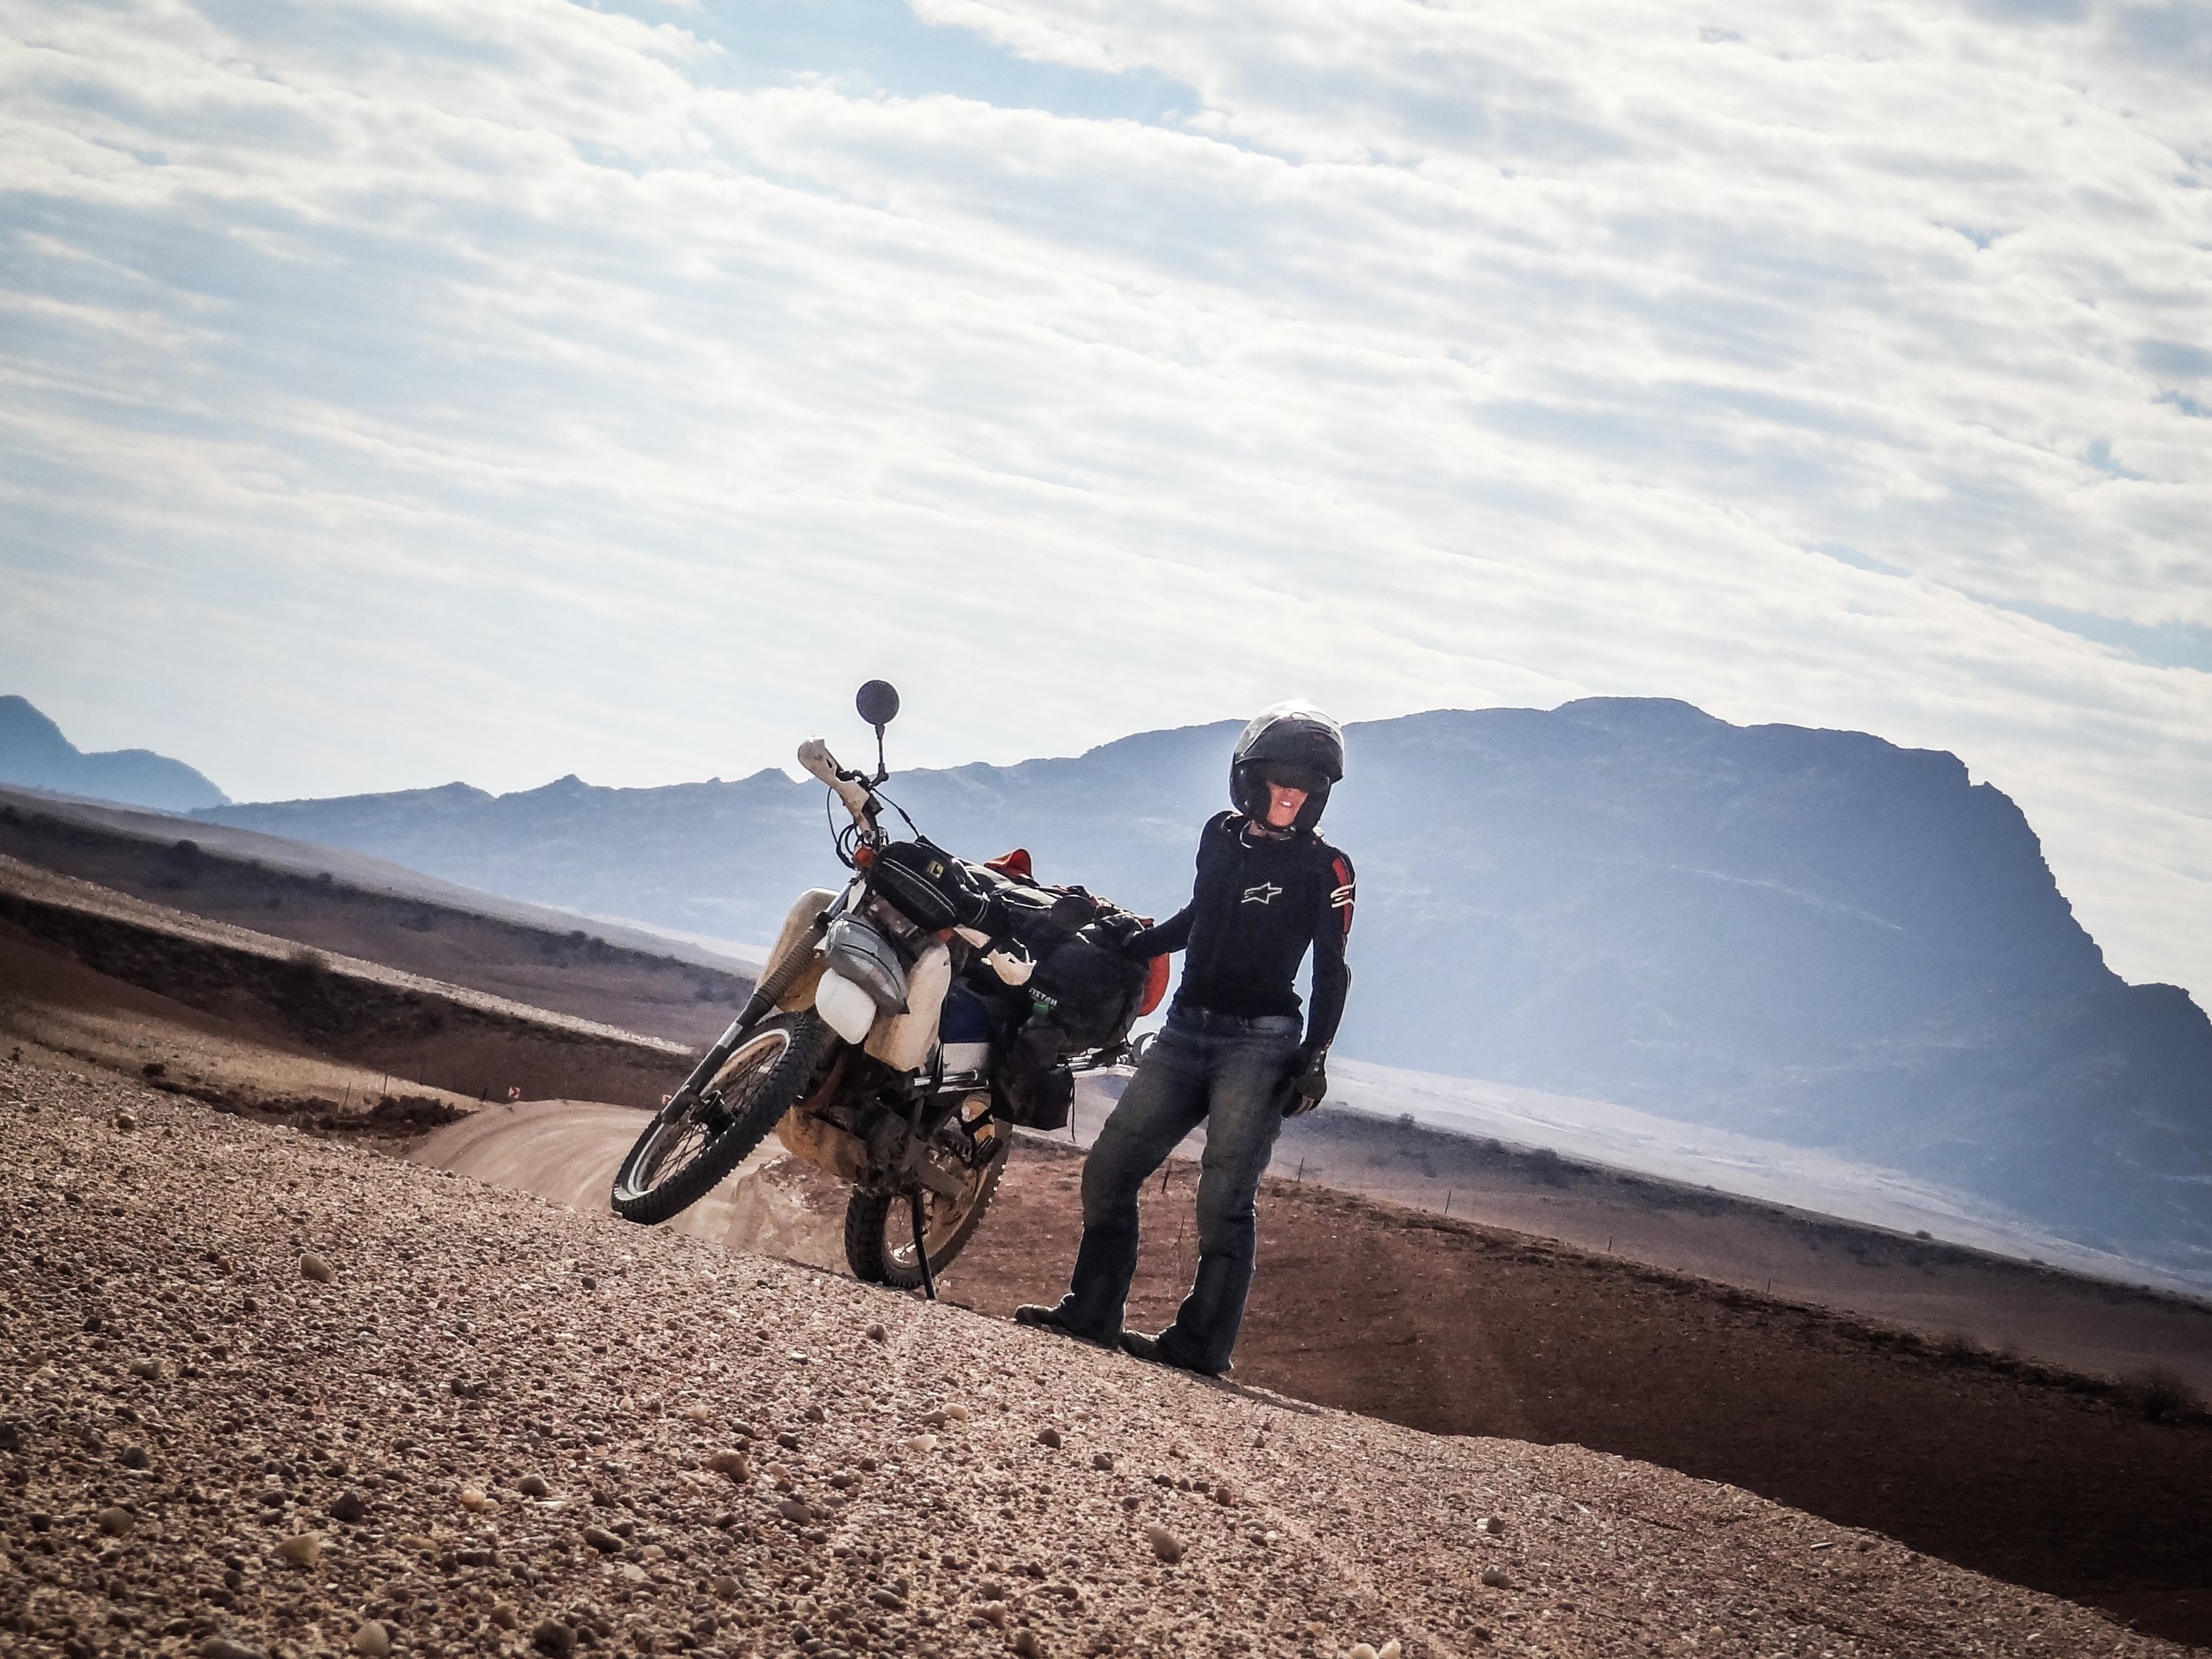  Woman rider standing beside motorcycle in a desert like area with mountains in background. 